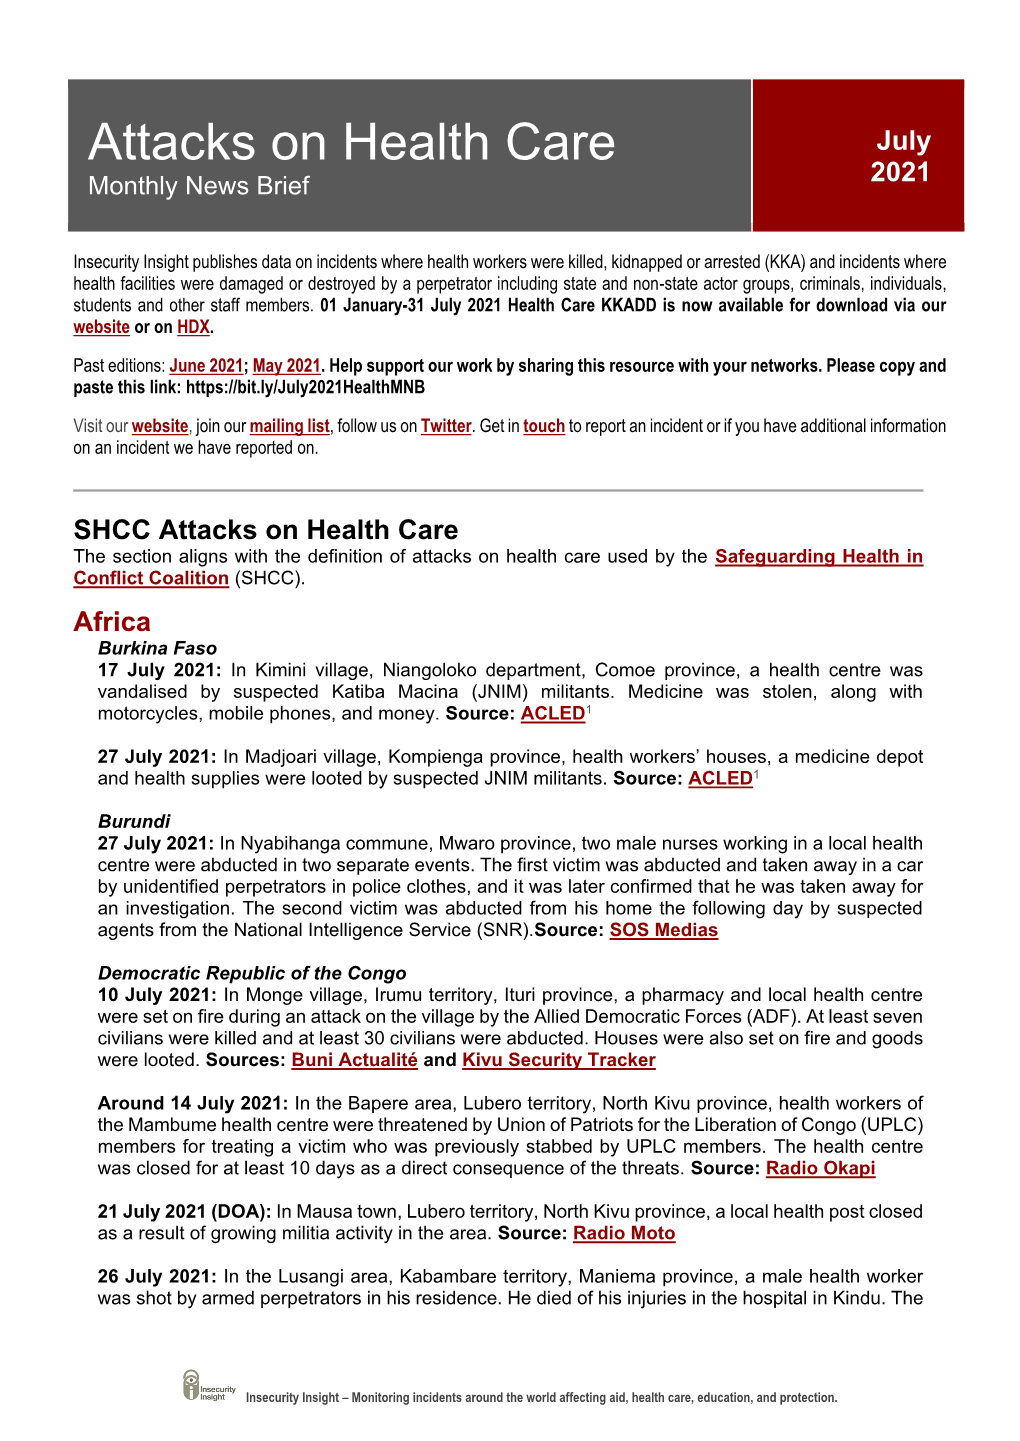 Attacks on Health Care July 2021 Monthly News Brief